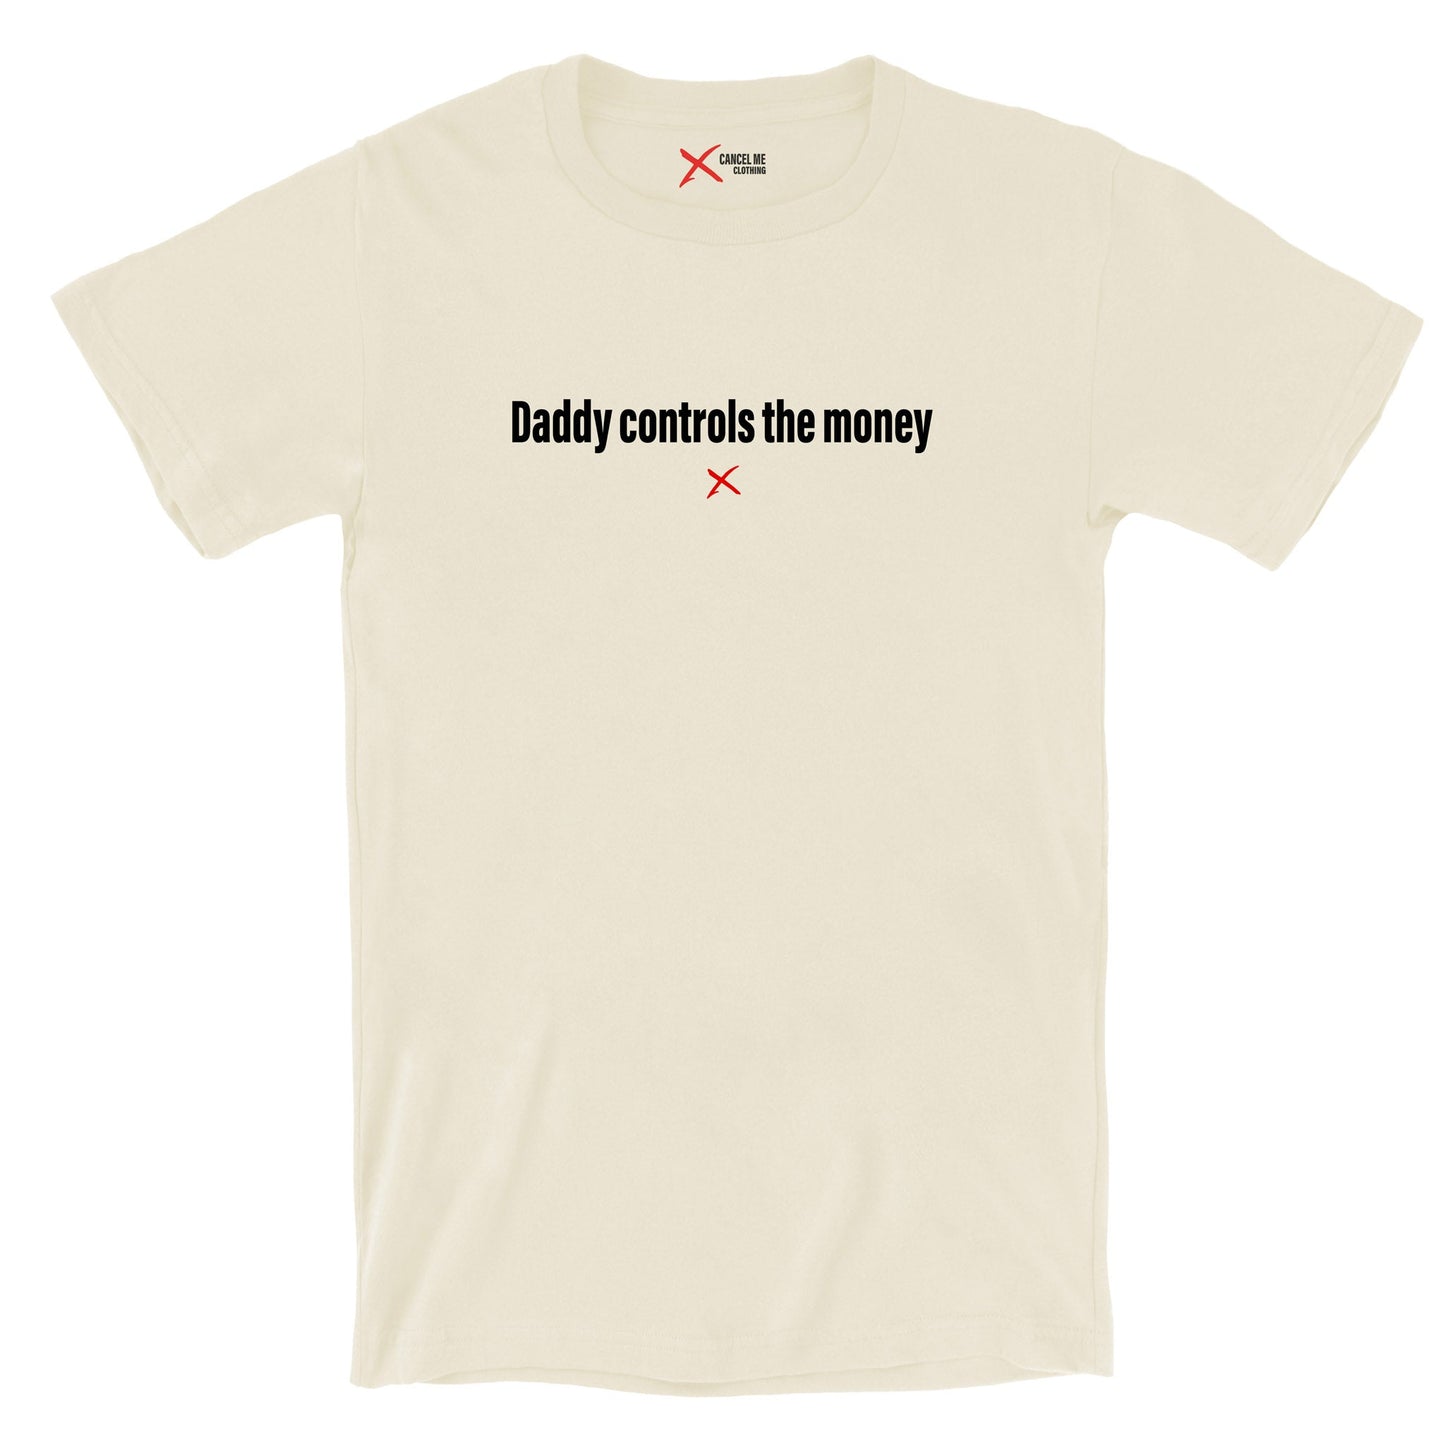 Daddy controls the money - Shirt